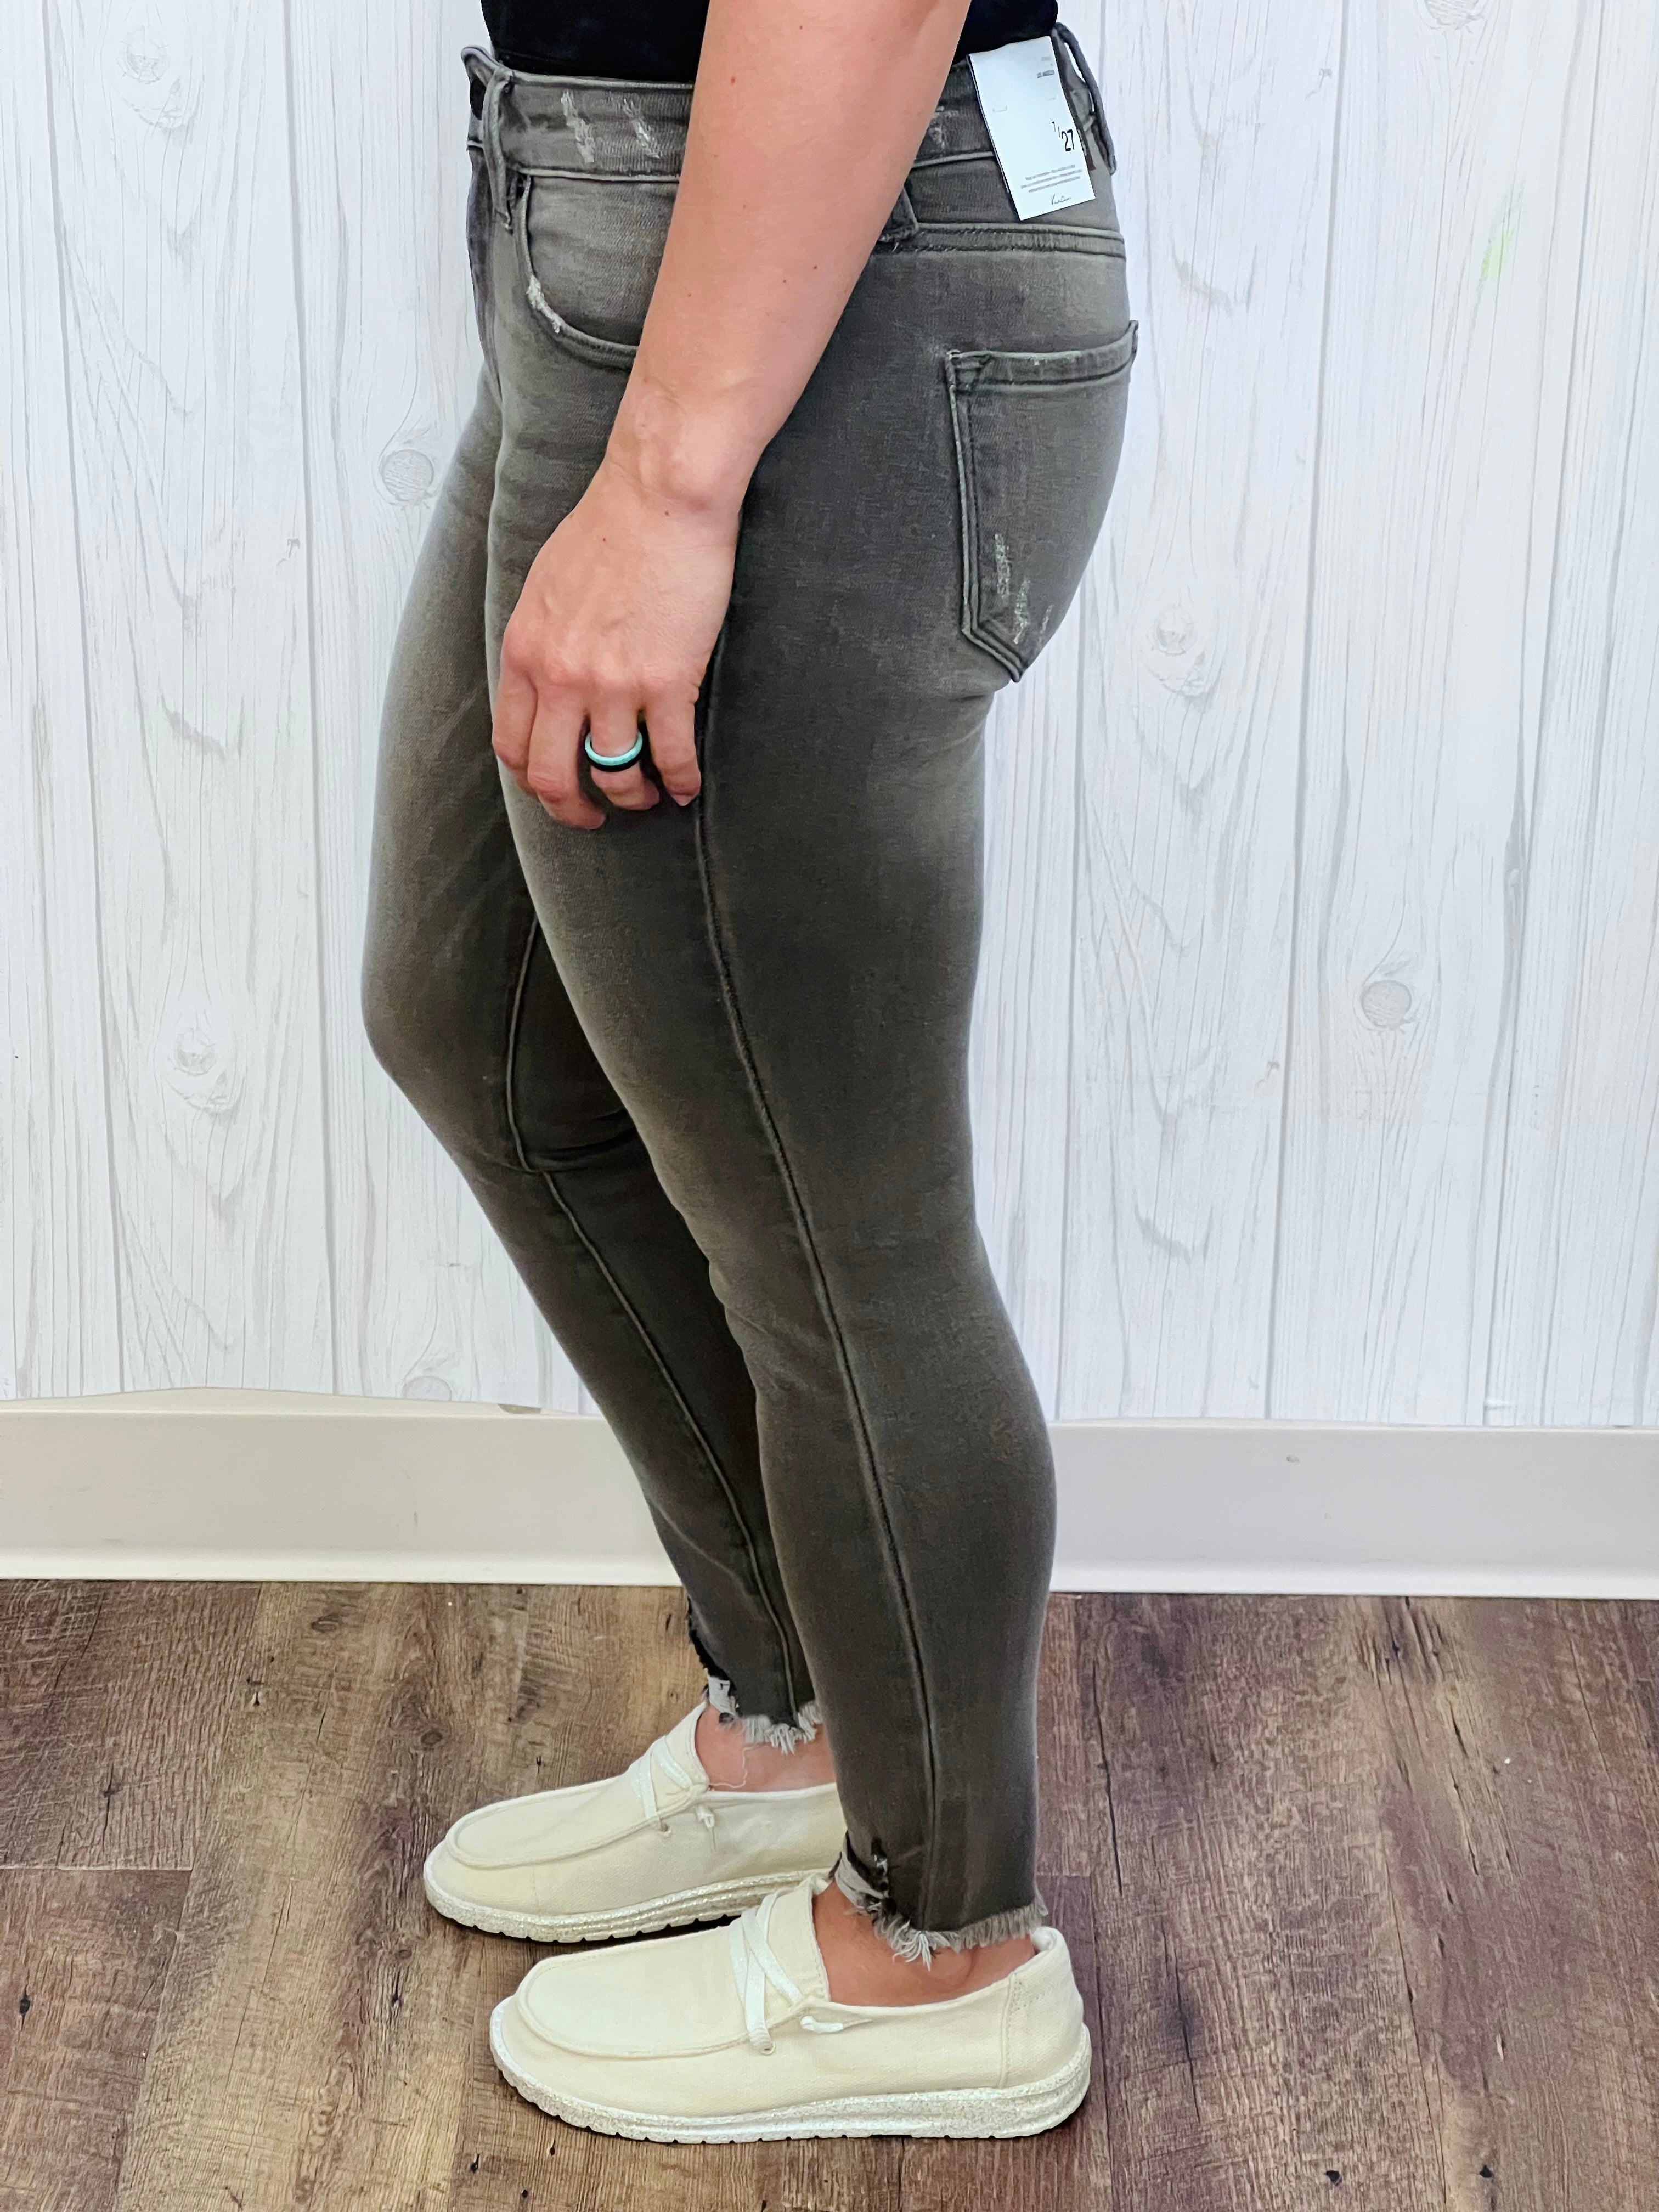 The Challenge KanCan Jeans  in Washed Gray